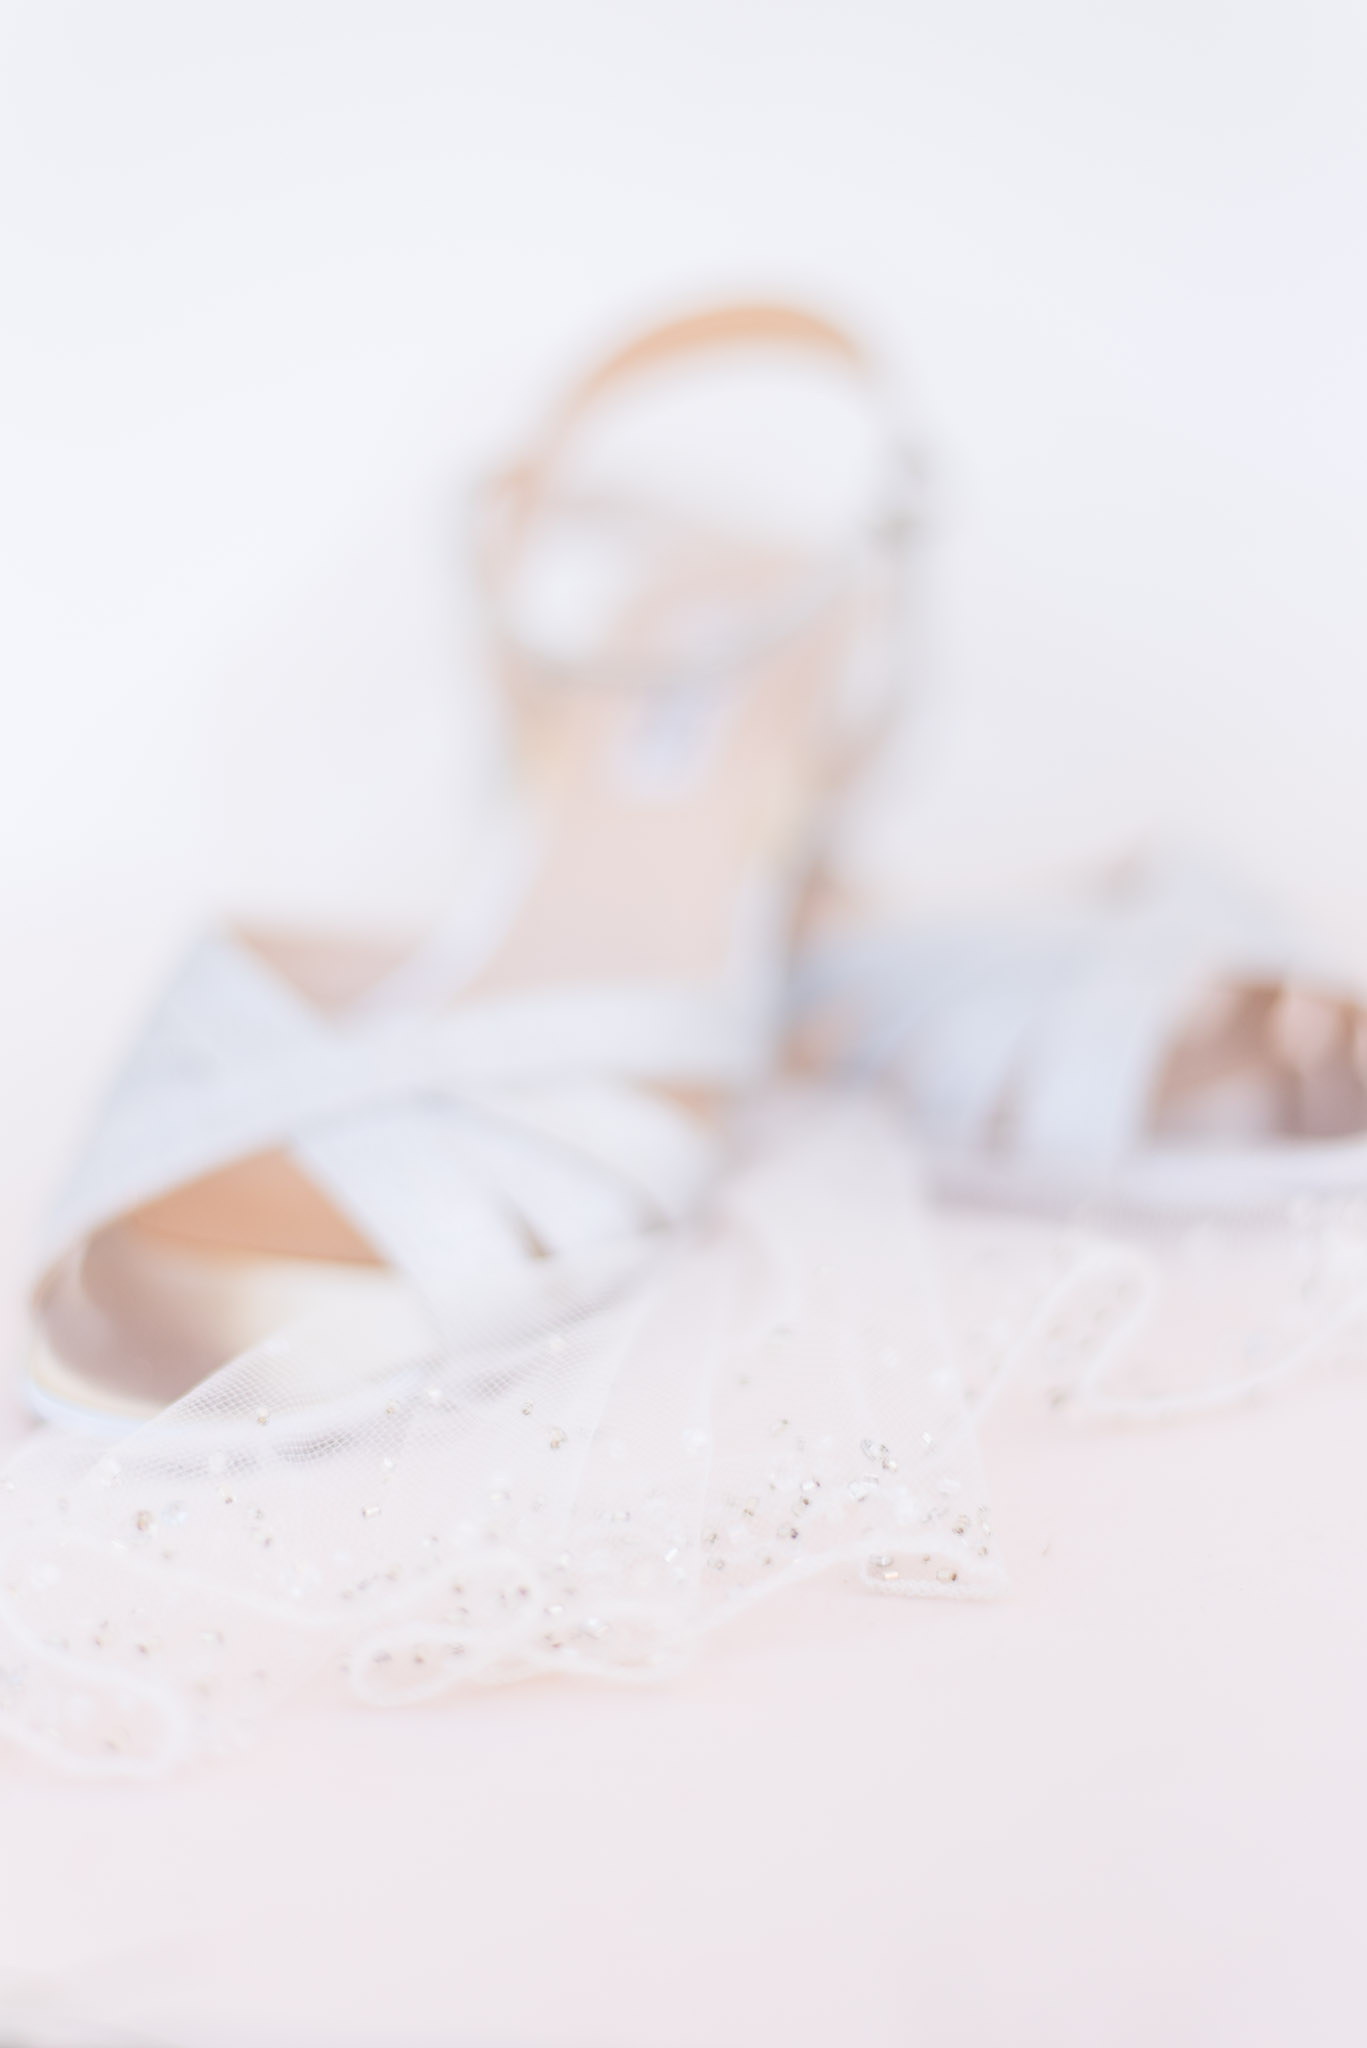 Indianapolis Wedding Veil Detail with Bridal Shoes in the Background